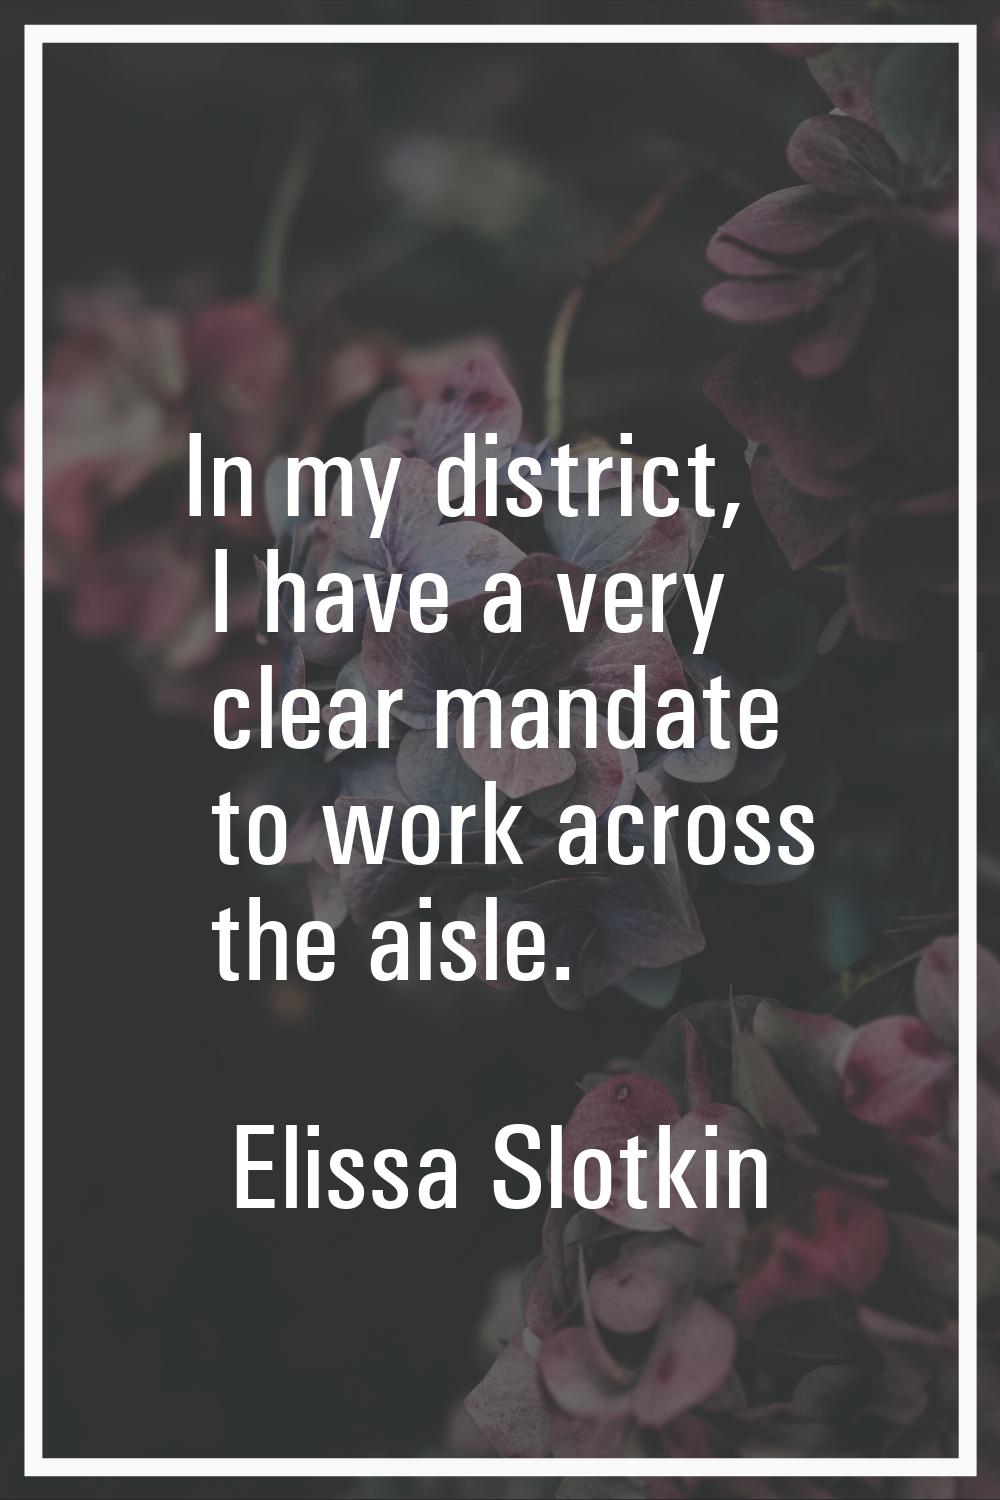 In my district, I have a very clear mandate to work across the aisle.